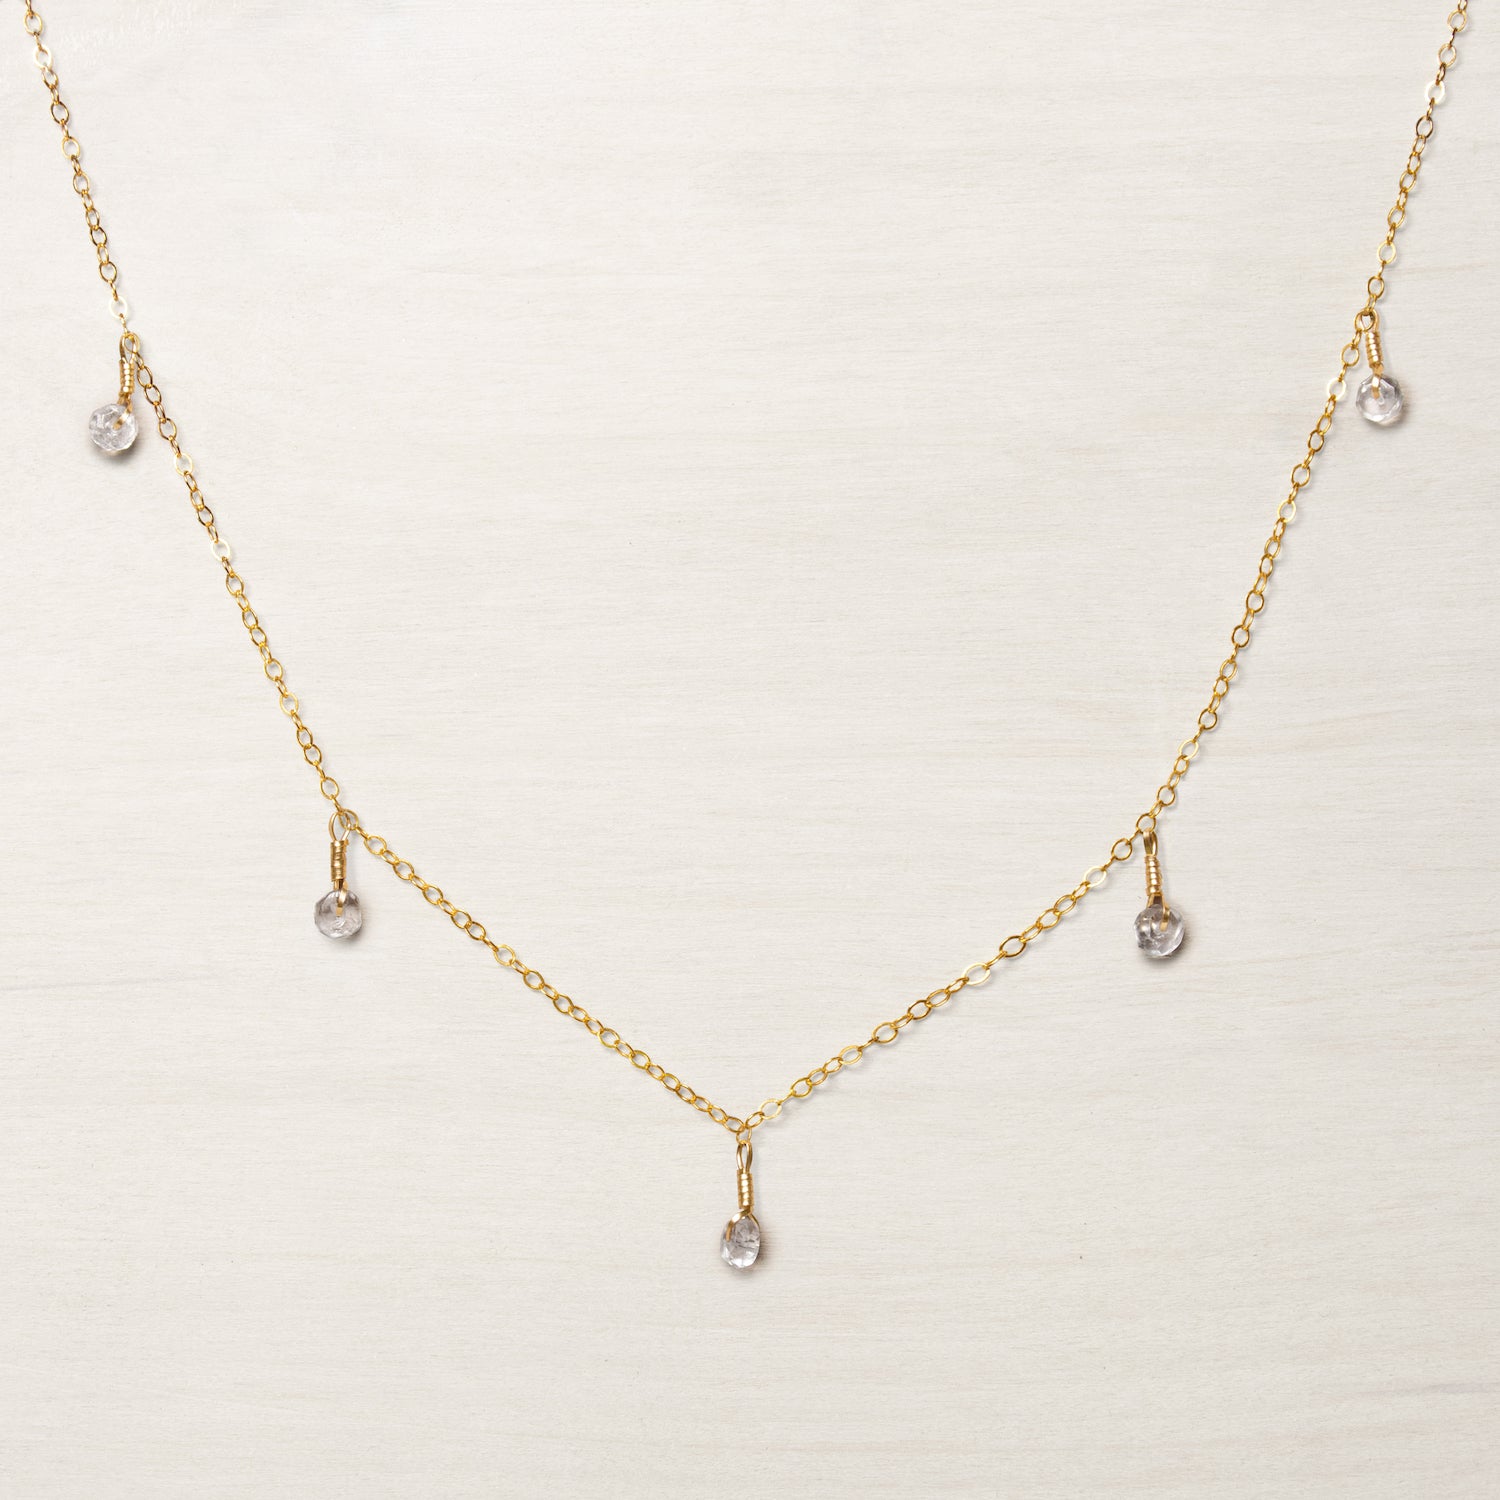 dainty gold chain princess necklace with clear quartz